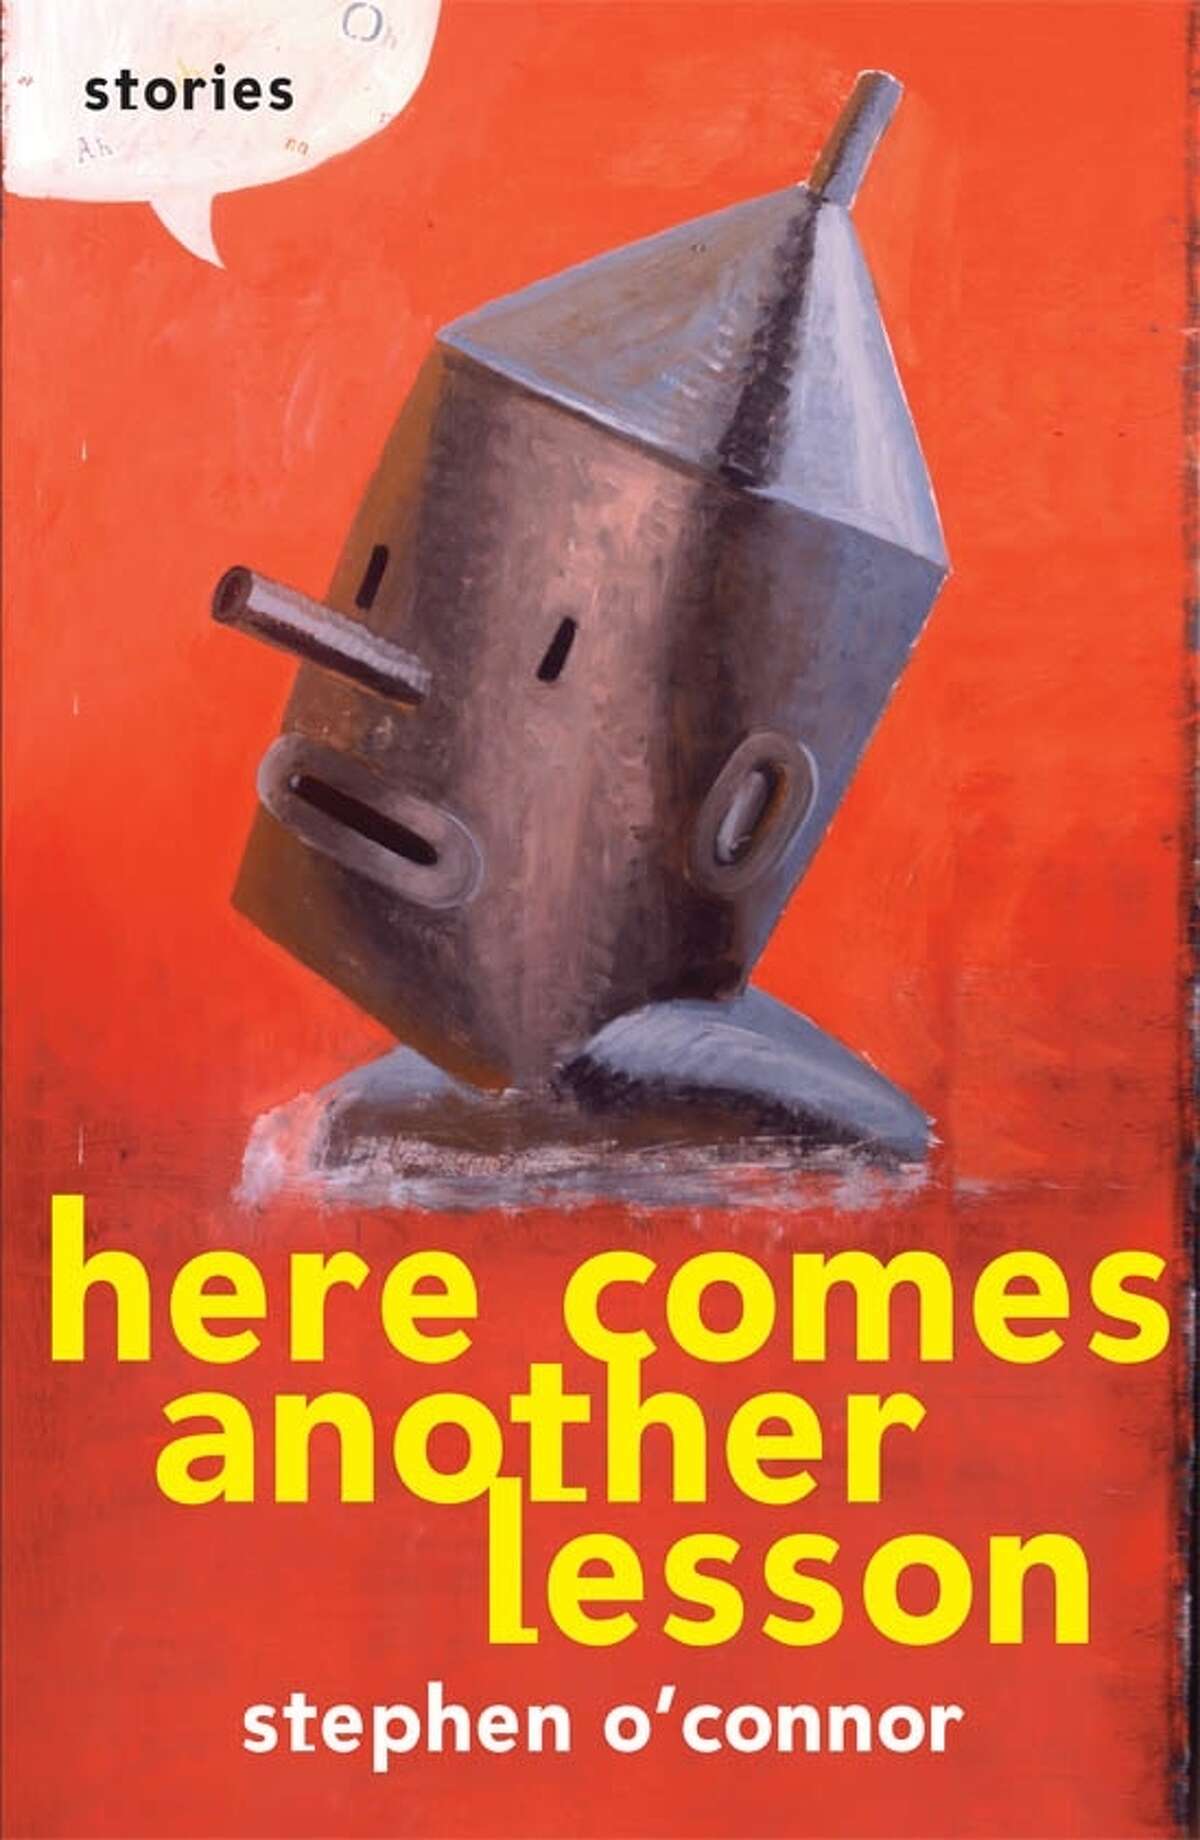 Stephen O'Connor's short story collection "Here Comes Another Lesson"